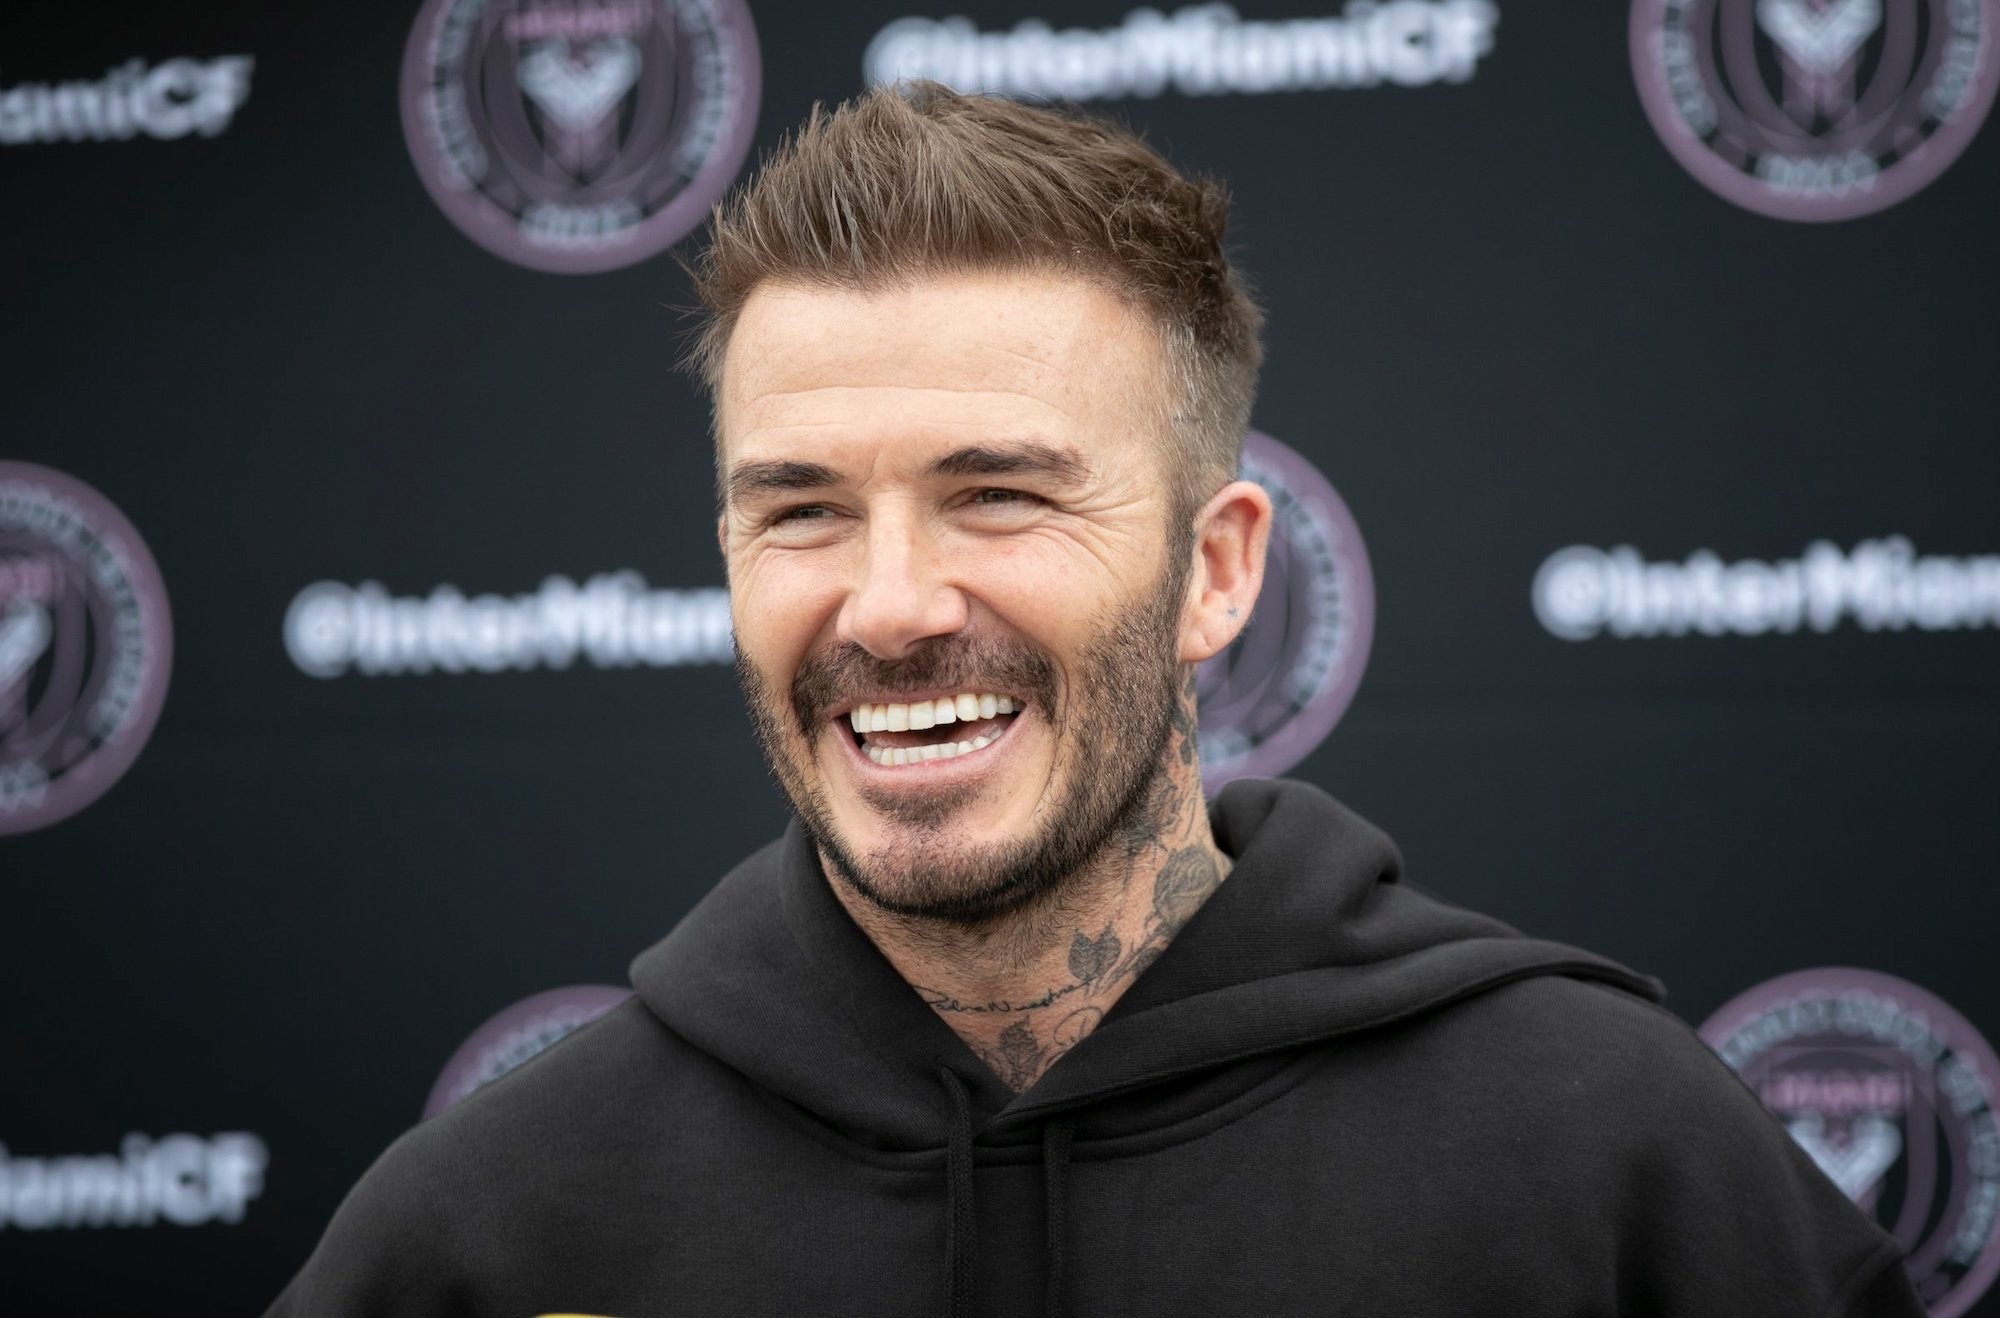 David Beckham laughing in front of a blurry black background